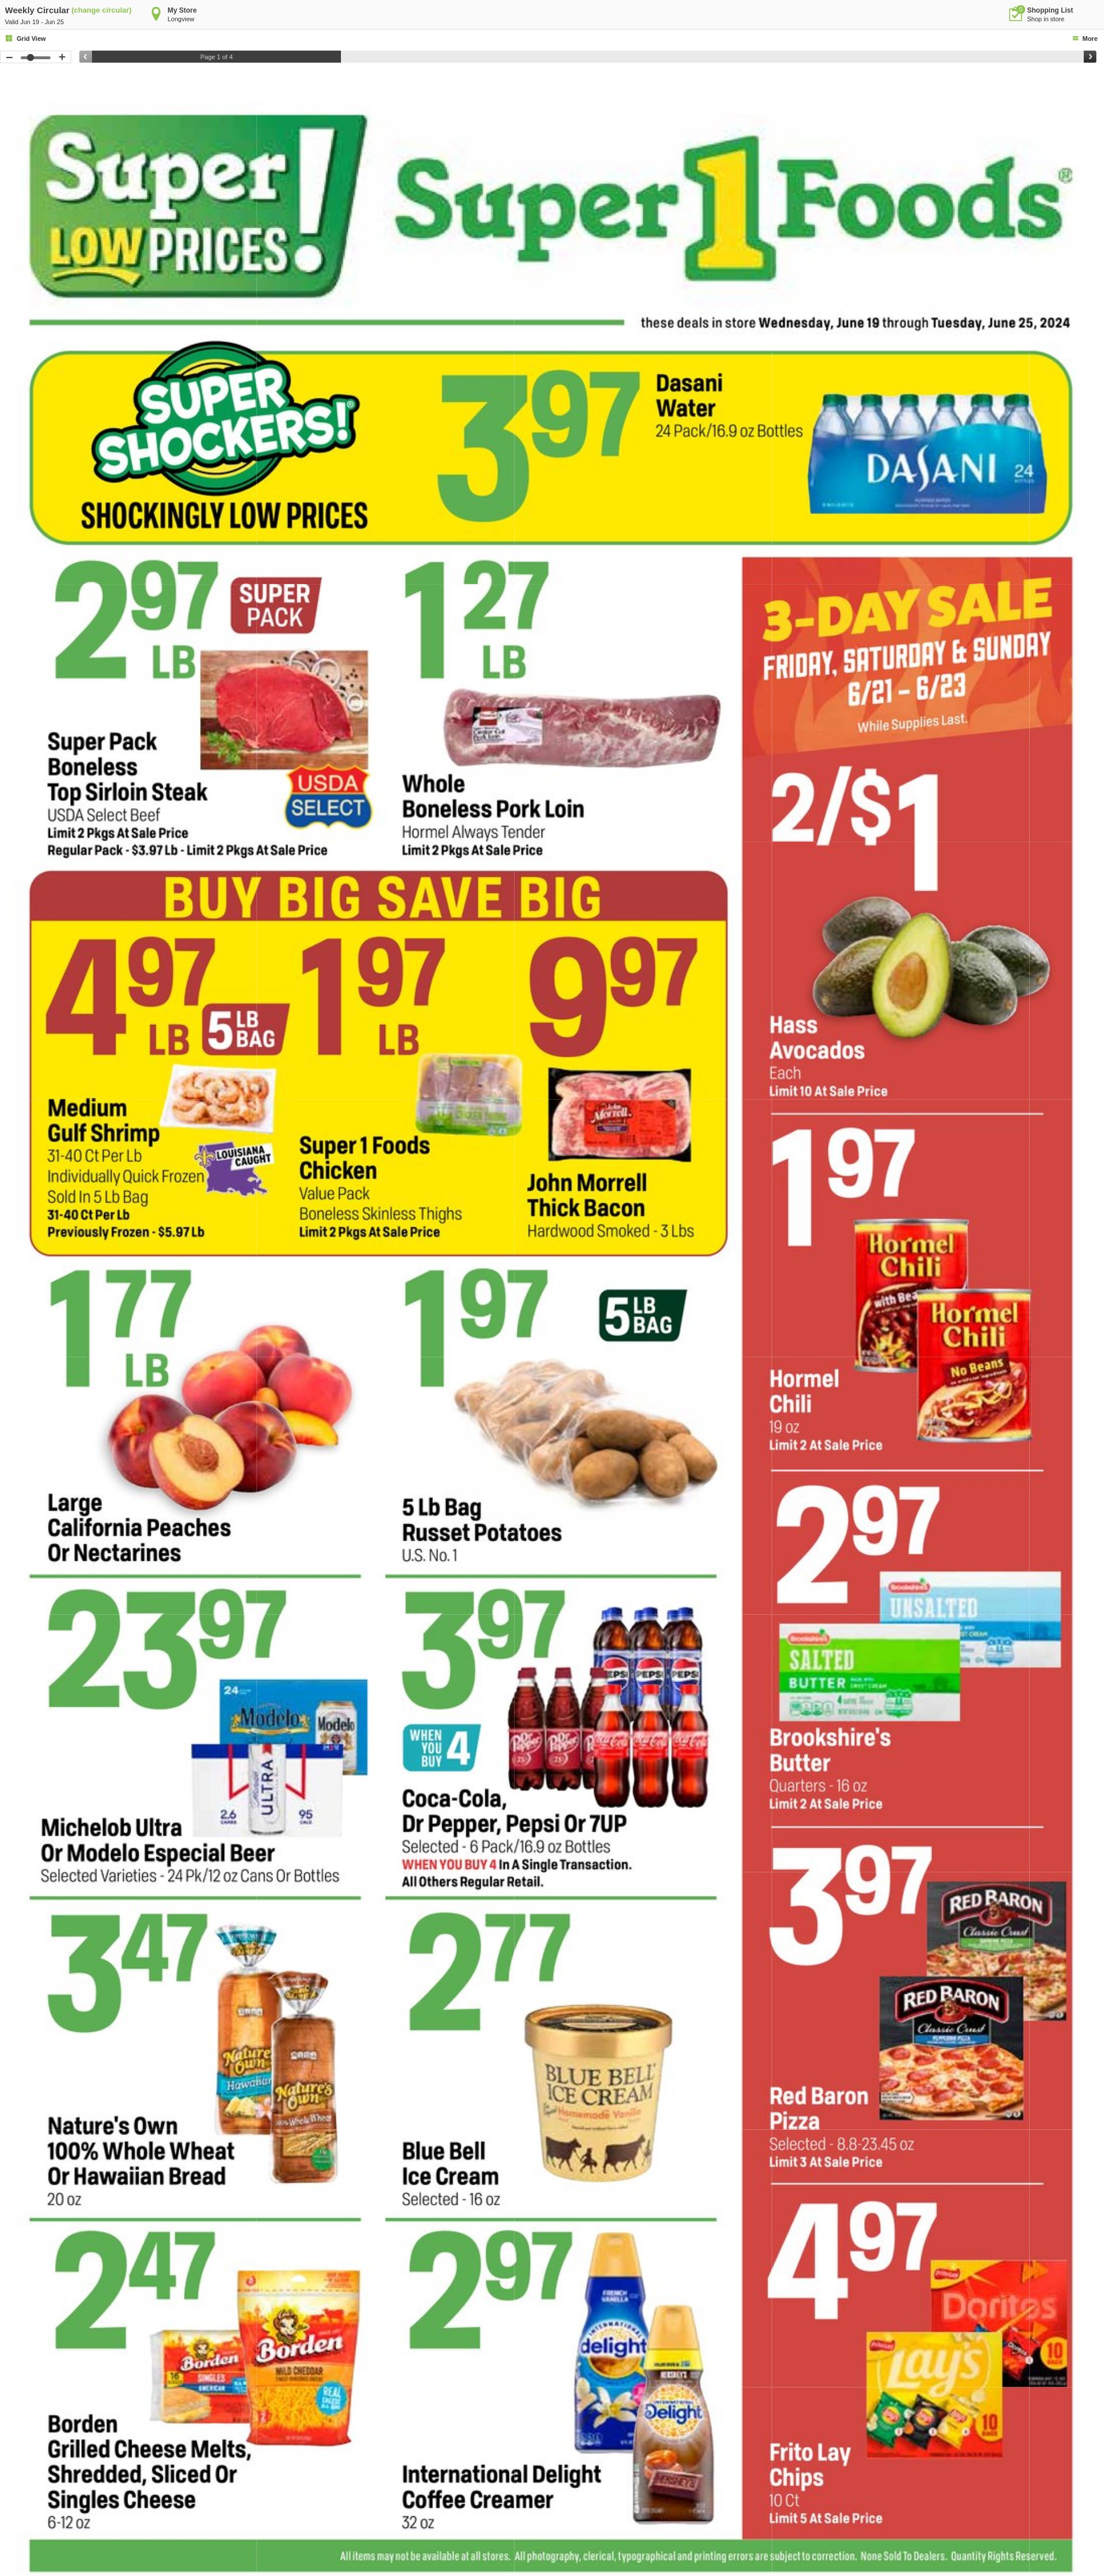 Super1Foods Promotional weekly ads